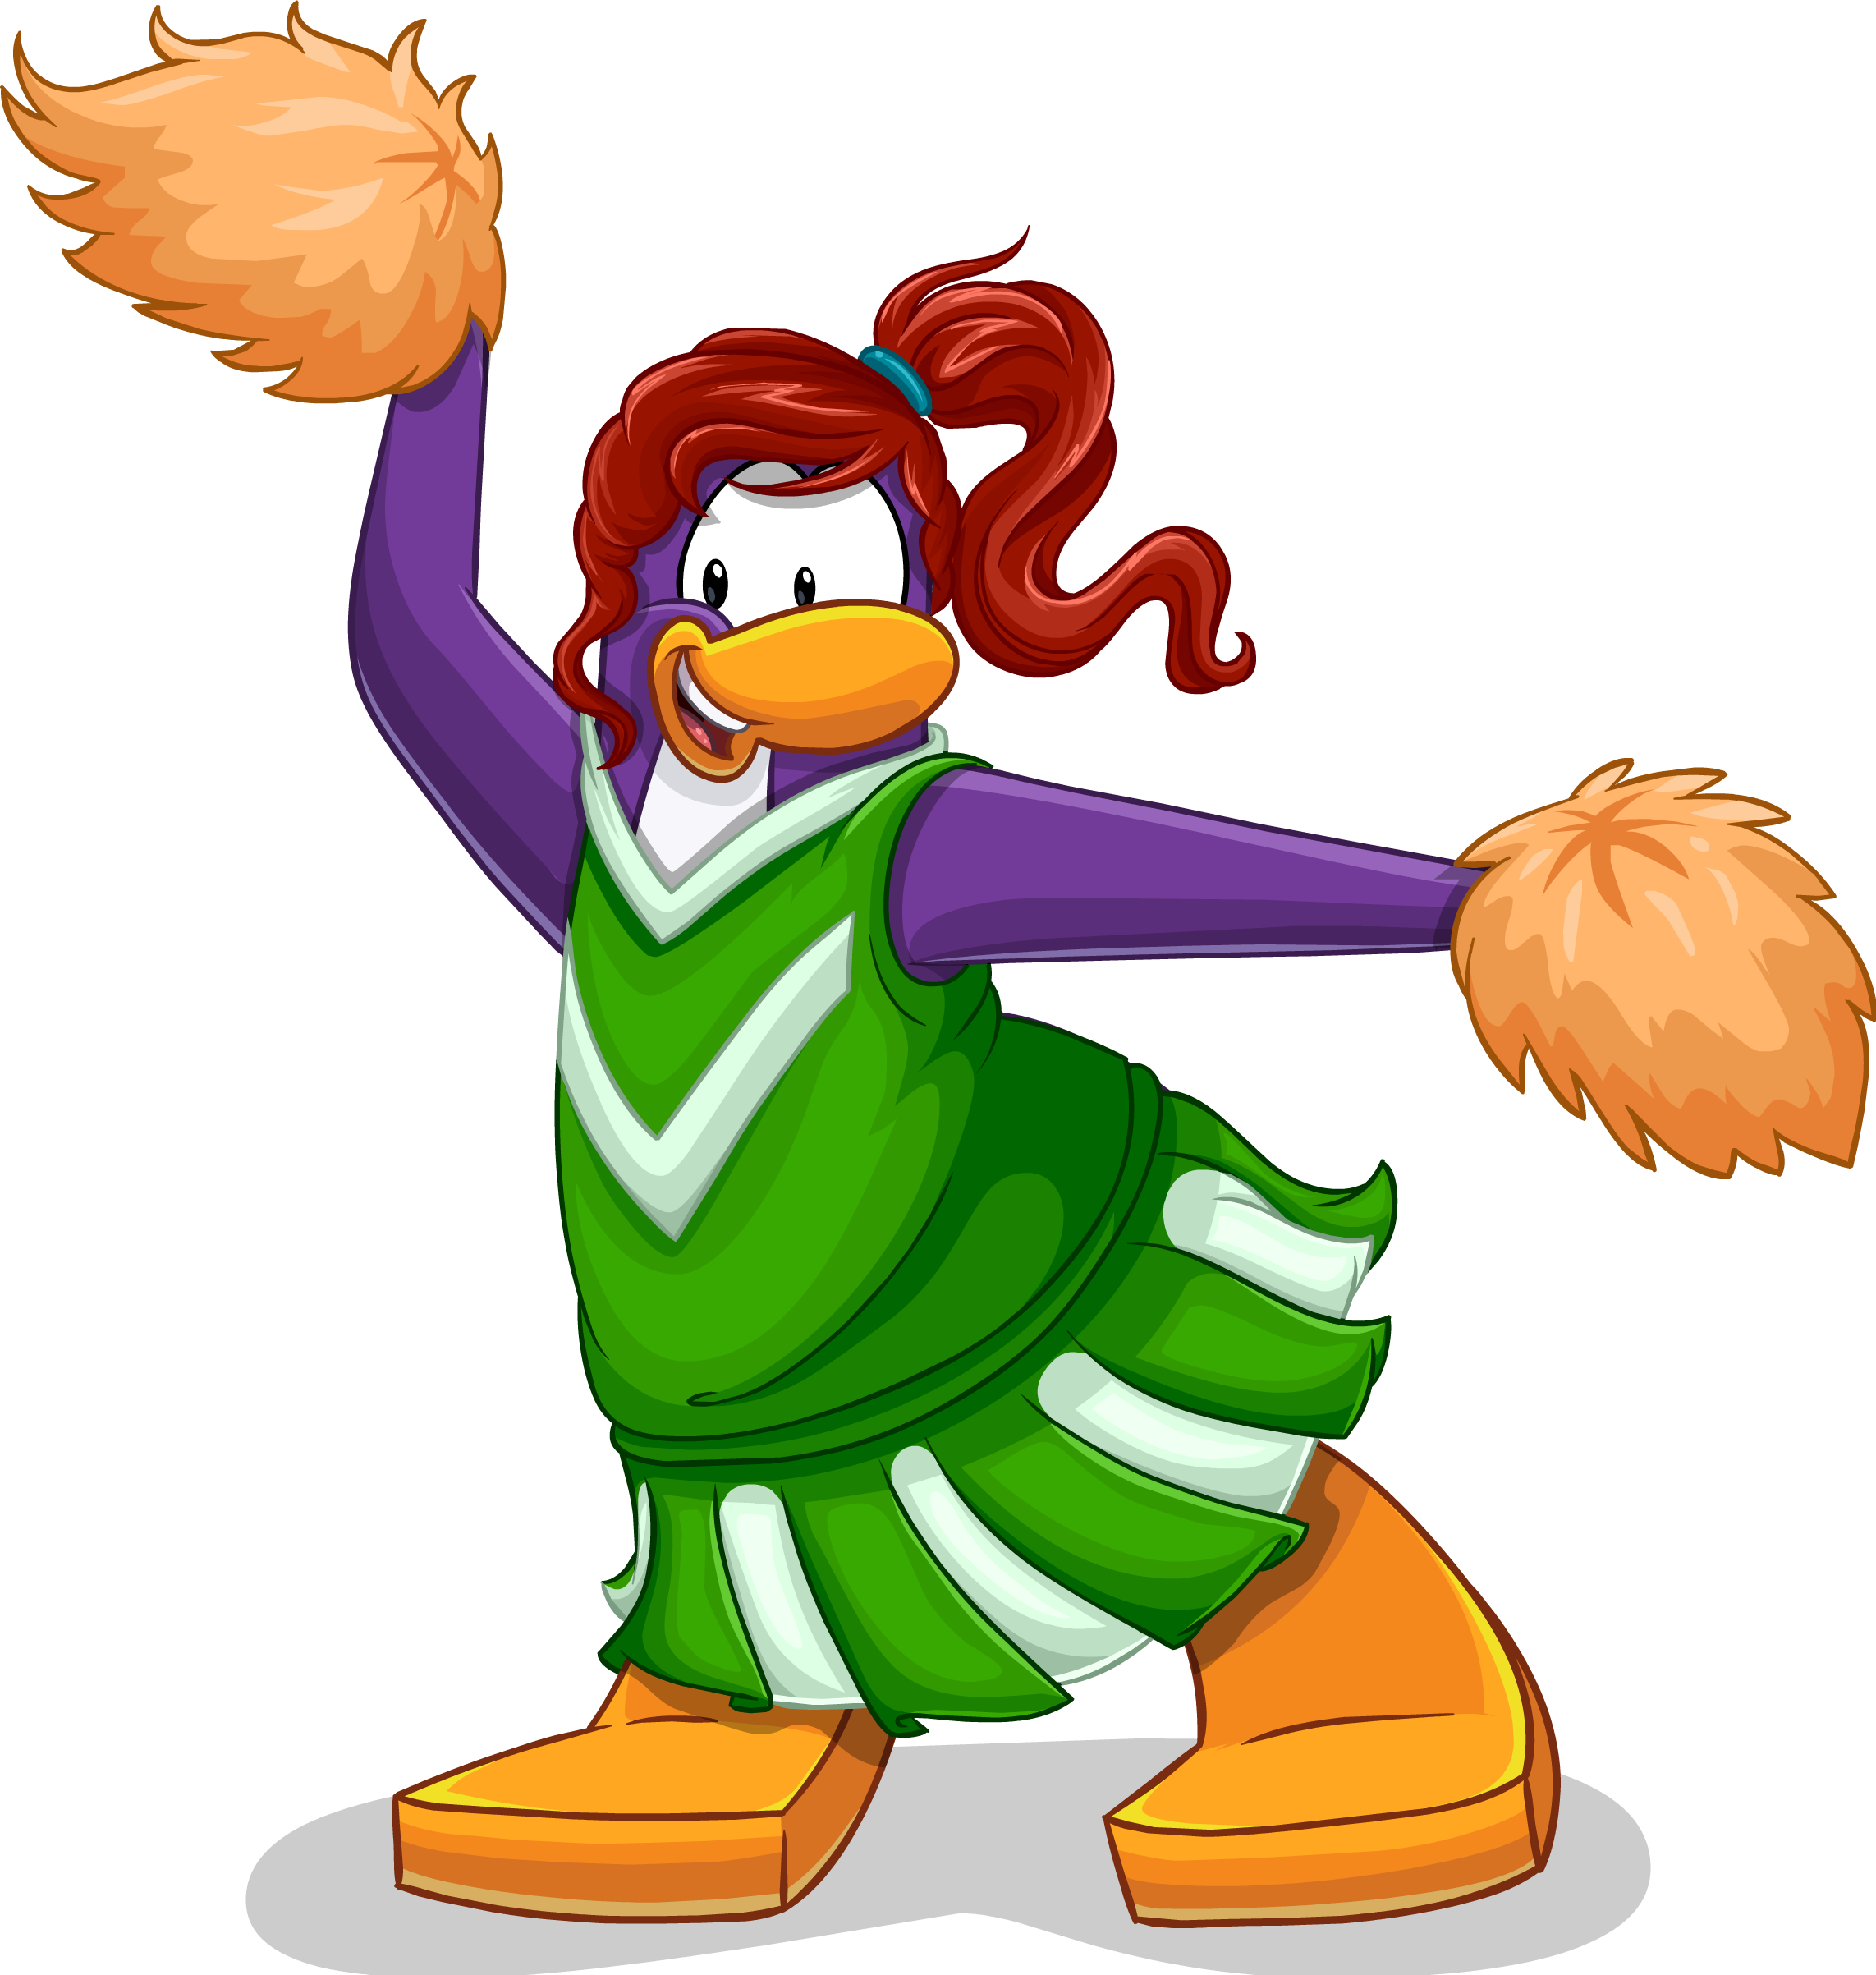 Snow And Sports Sept 2014 5 - Club Penguin Cheerleader (2285x2405)